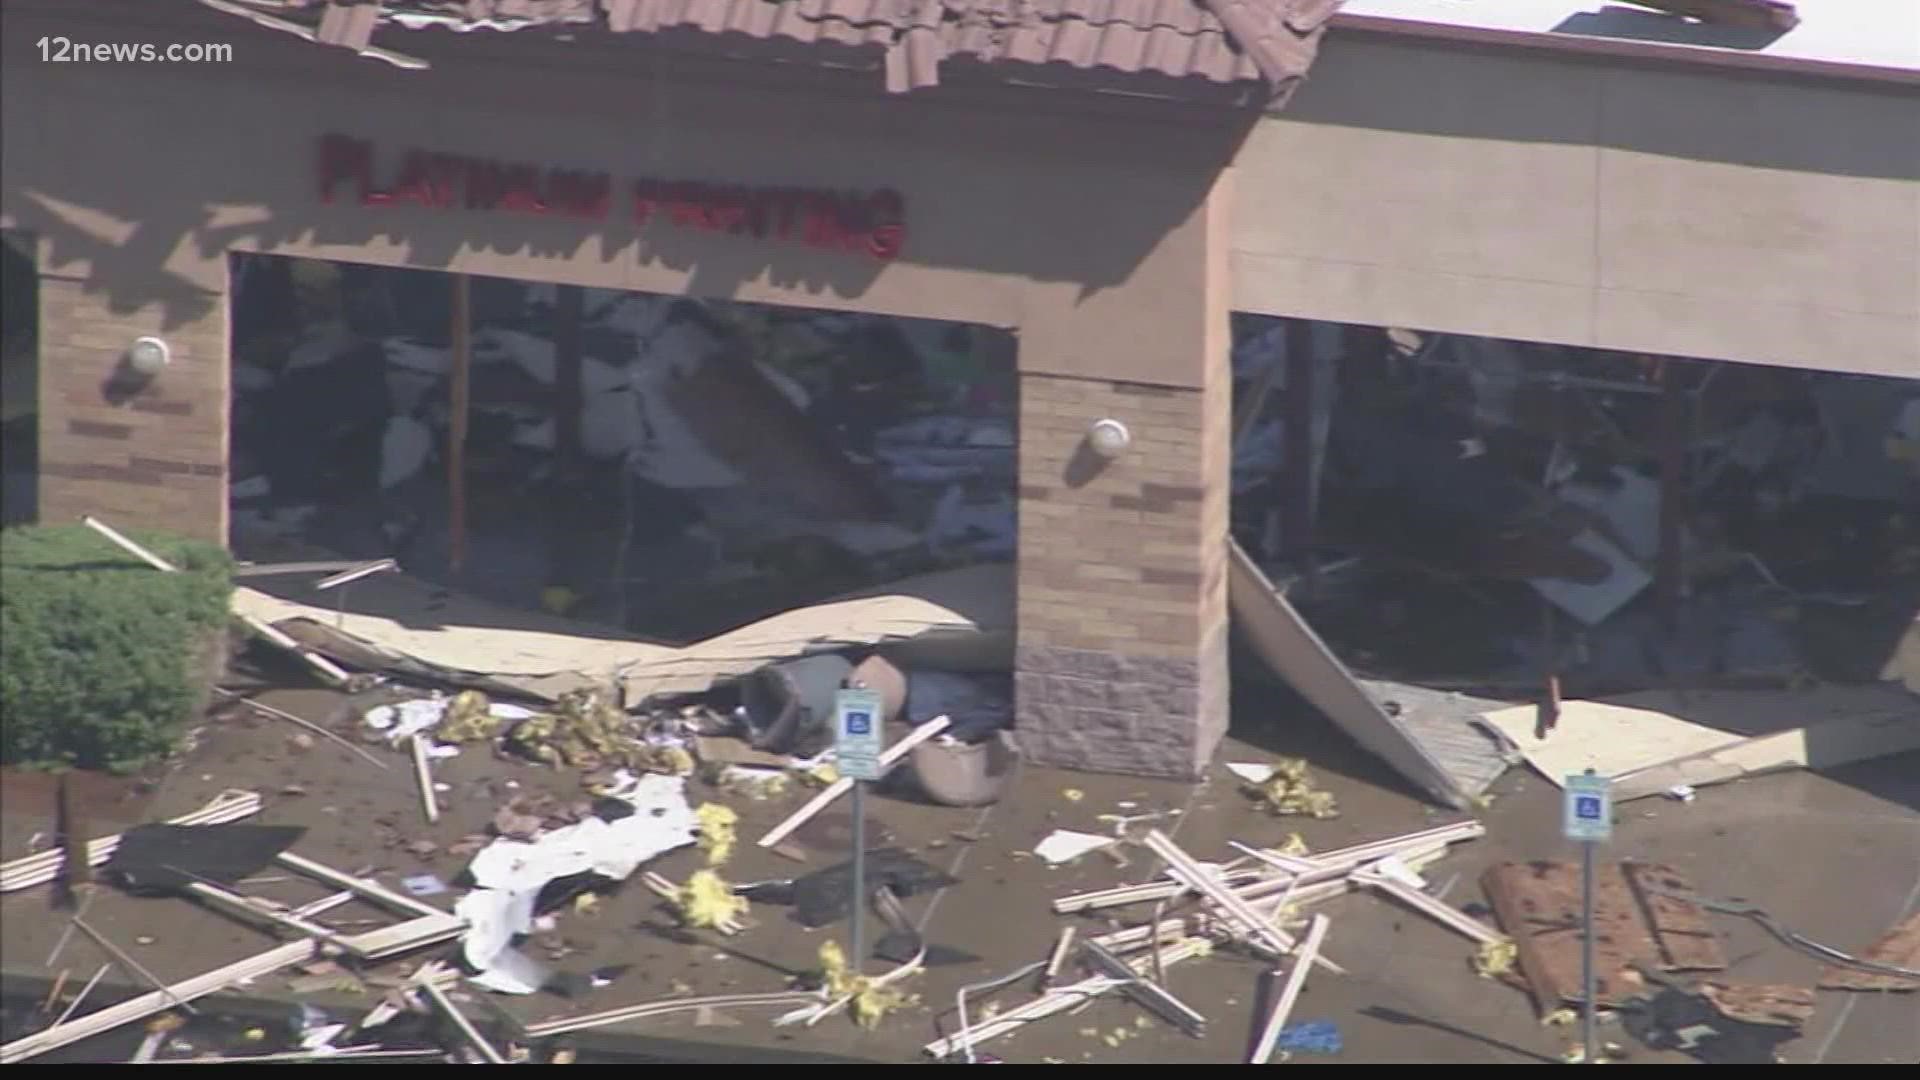 The roof collapsed at a print shop in Chandler following an explosion on Thursday morning.